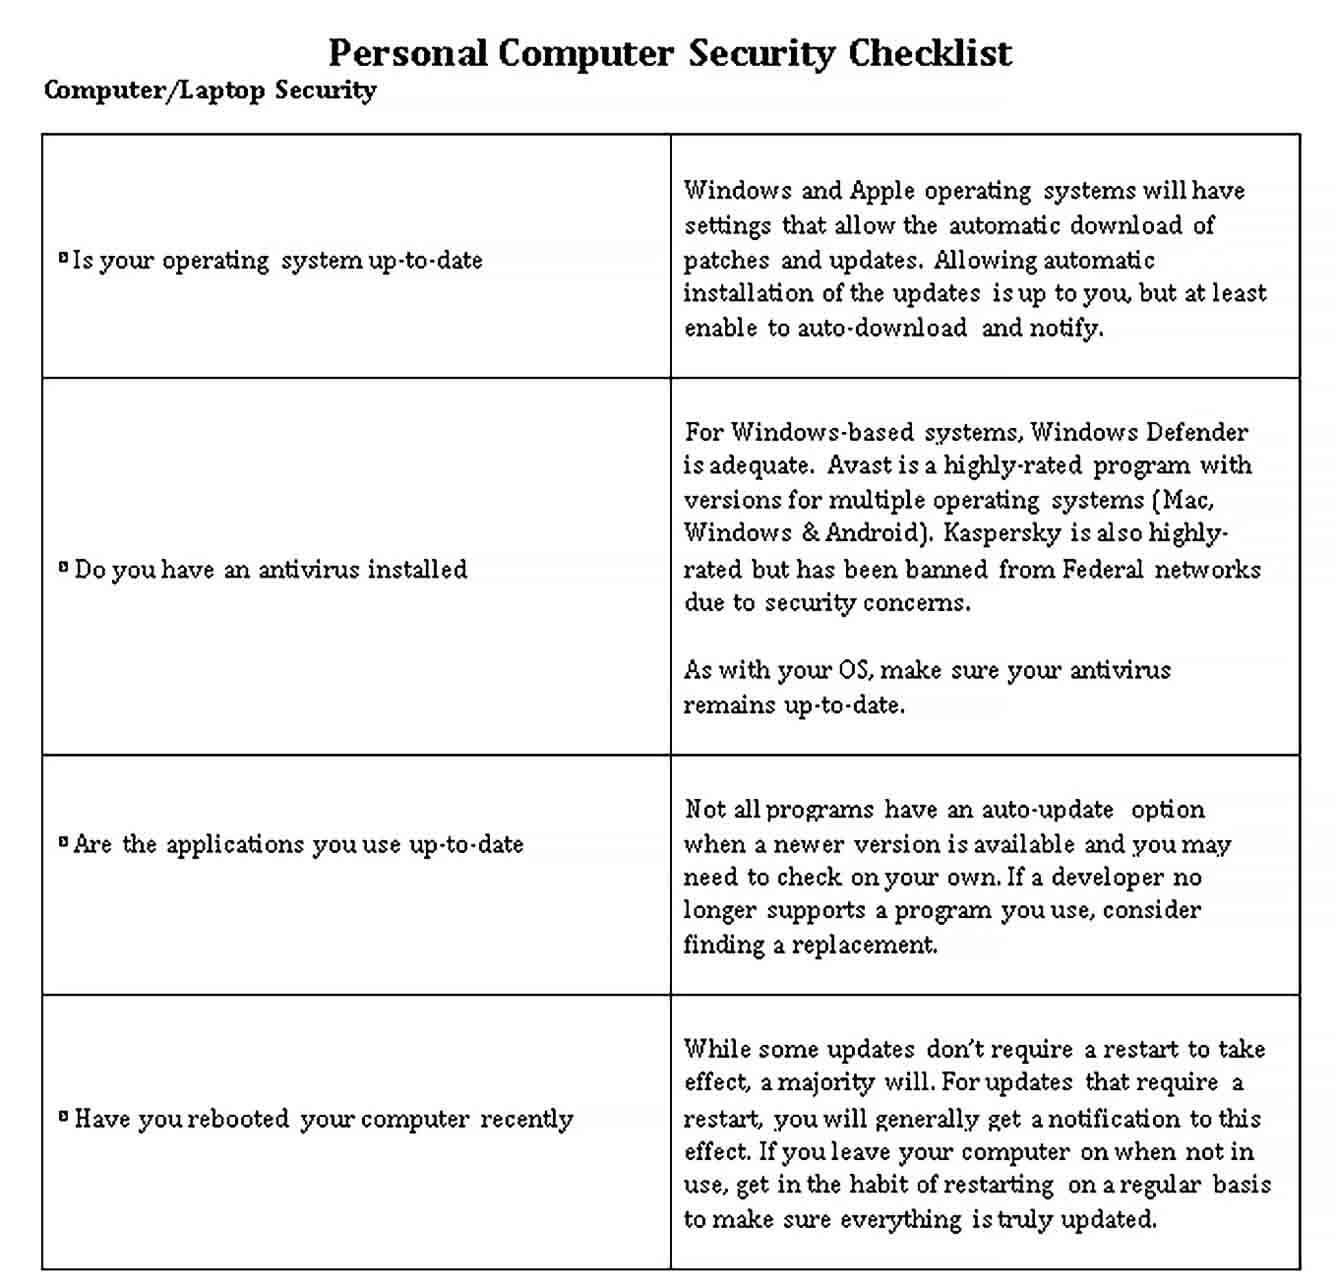 Sample Personal Computer Security Checklist in PDF